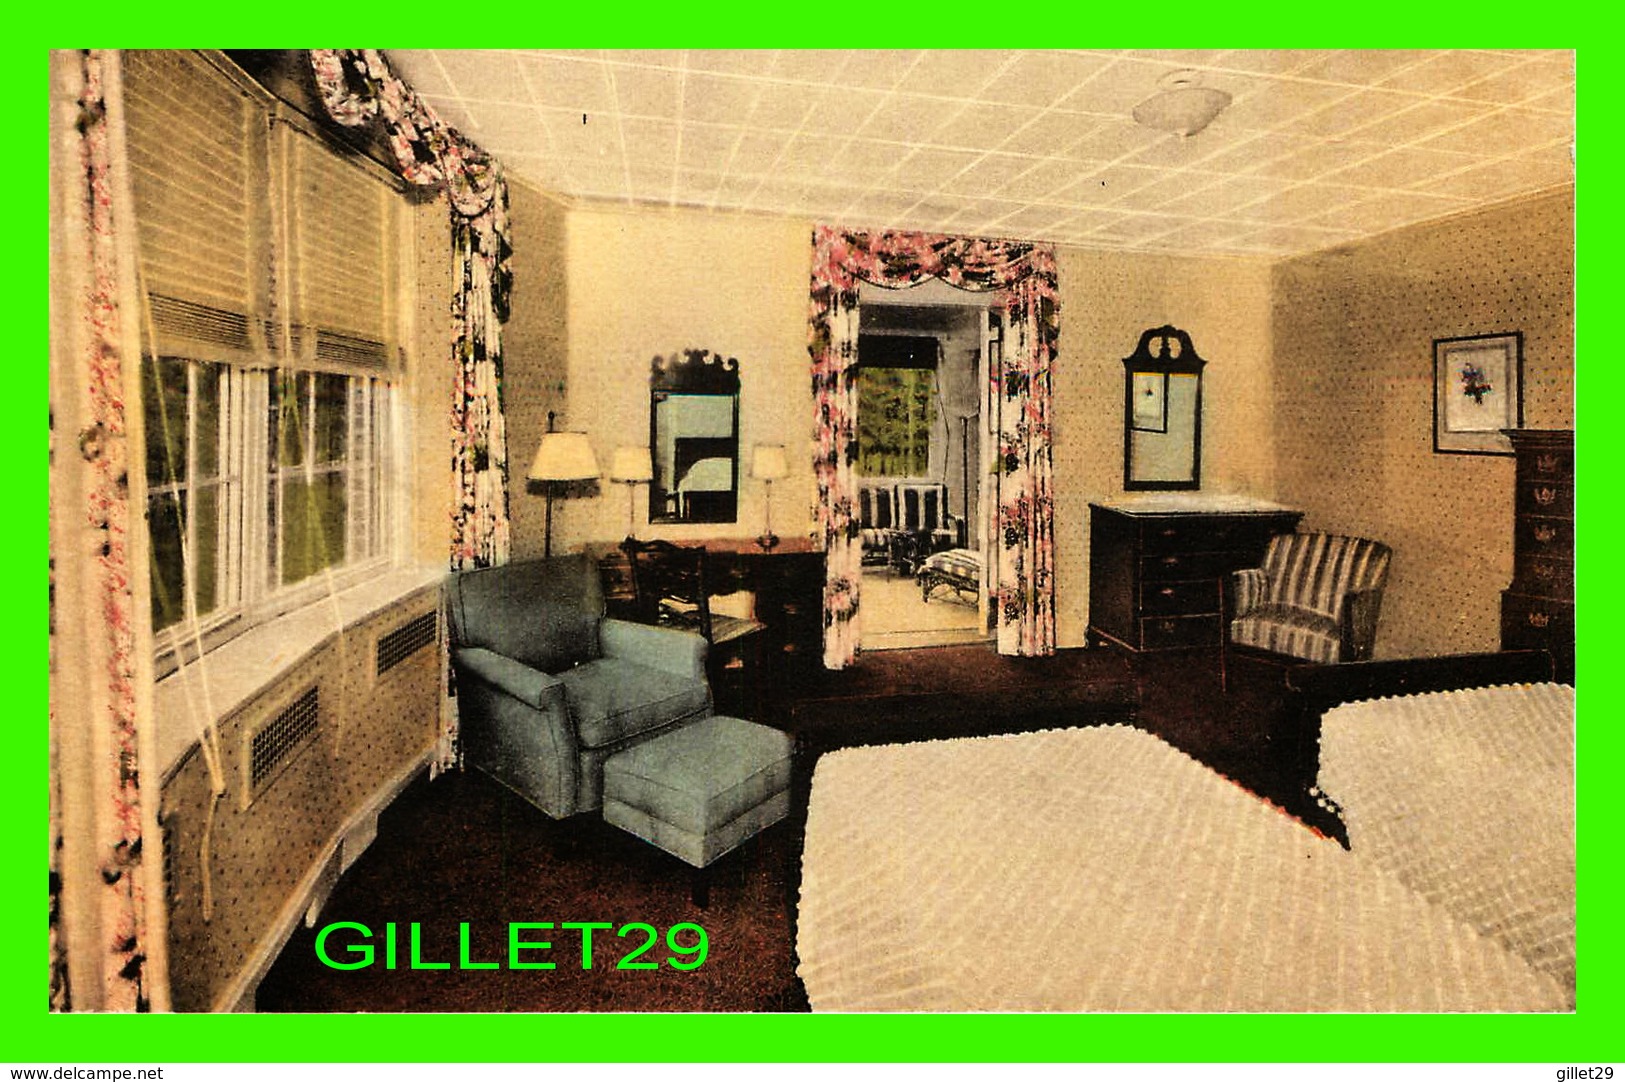 SARATOGA SPRINGS, NY - TWIN BEDDED BEDROOM, NEW ADDITION THE GIDEON PUTNAM - TRAVEL IN 1952 - - Saratoga Springs